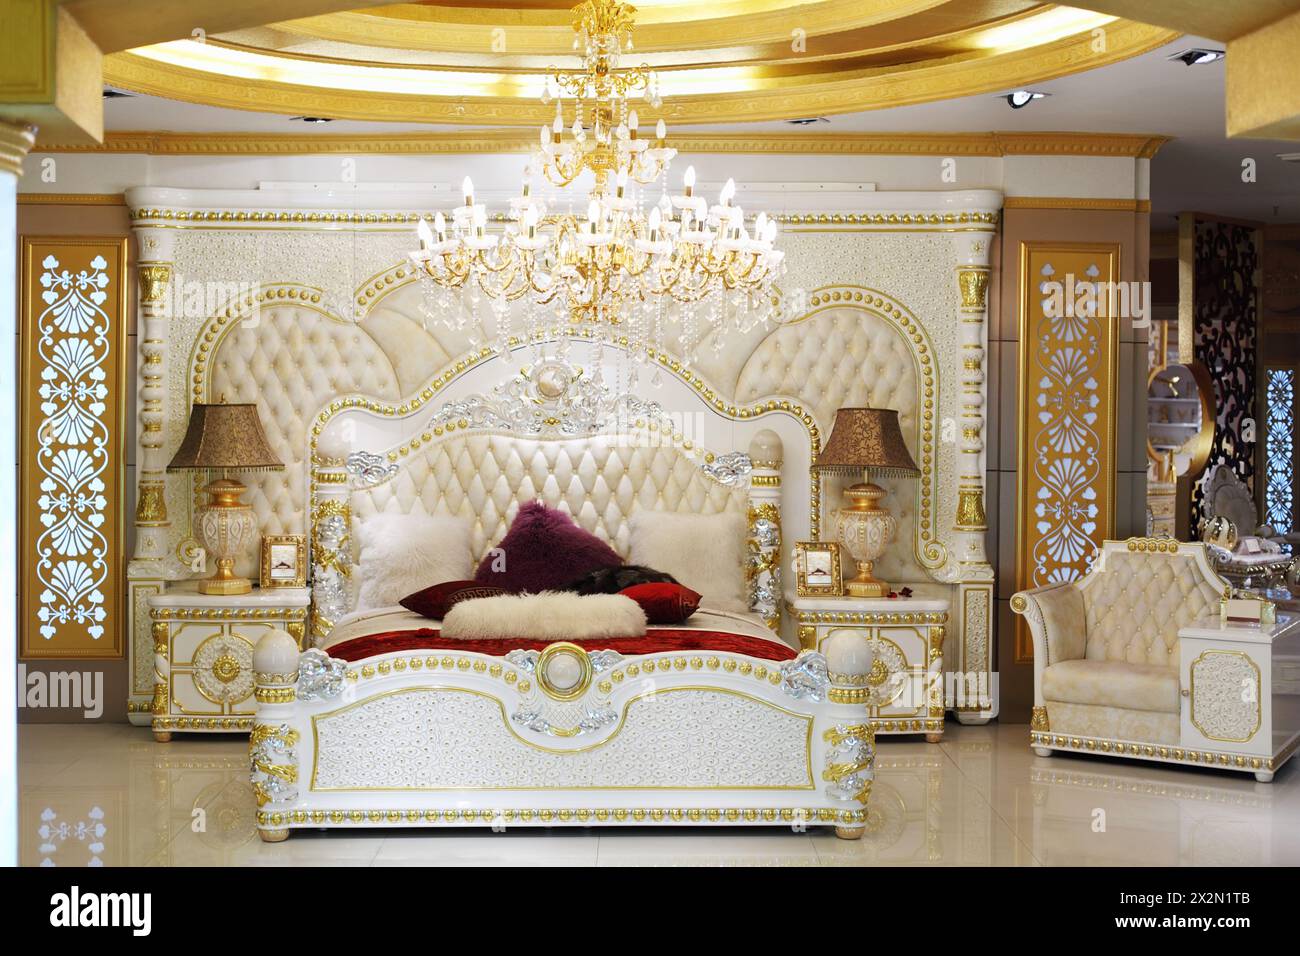 FOSHAN - NOVEMBER 21: Luxurious bed in classic style in Louvre furniture trade center on November 21, 2011 in Foshan near Guangzhou, China. Total exhi Stock Photo